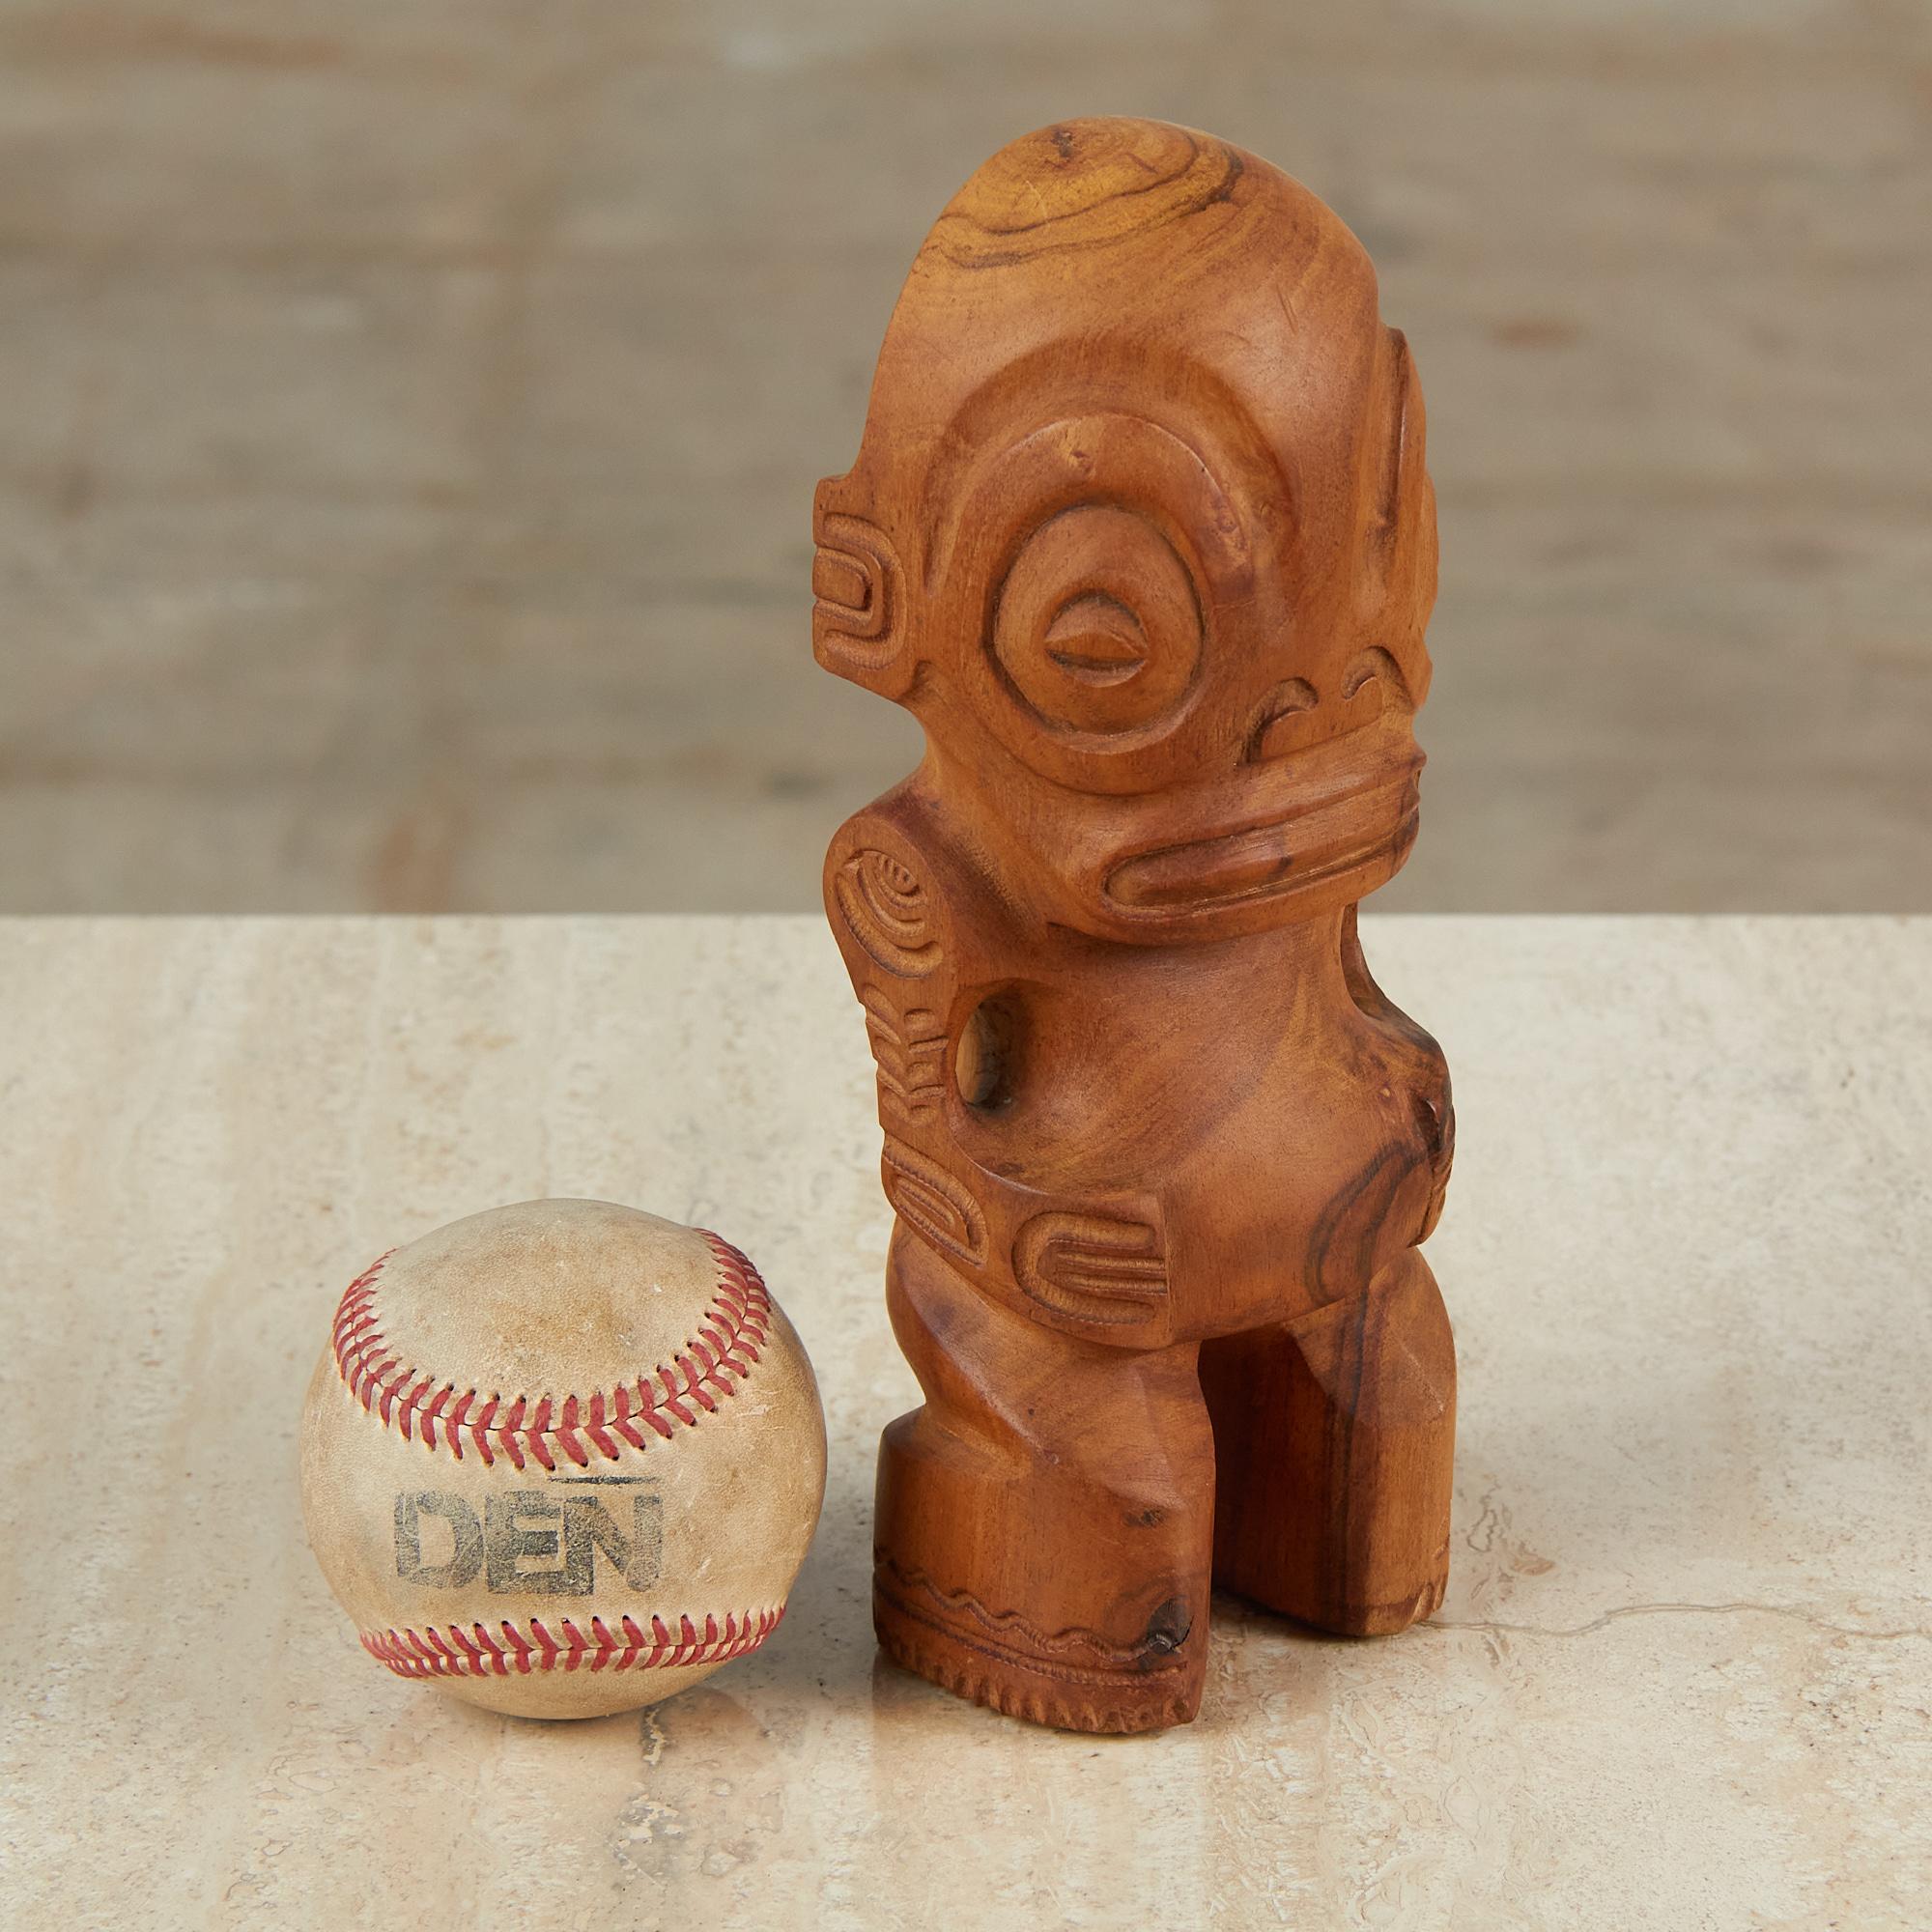 A small, hand-carved Polynesian sculpture from the Marquesas Islands with soft curved wood grain throughout. Carved from a solid piece of wood, this sculpture features large expressive eyes and mouth with intricate detailing on the outer arms and